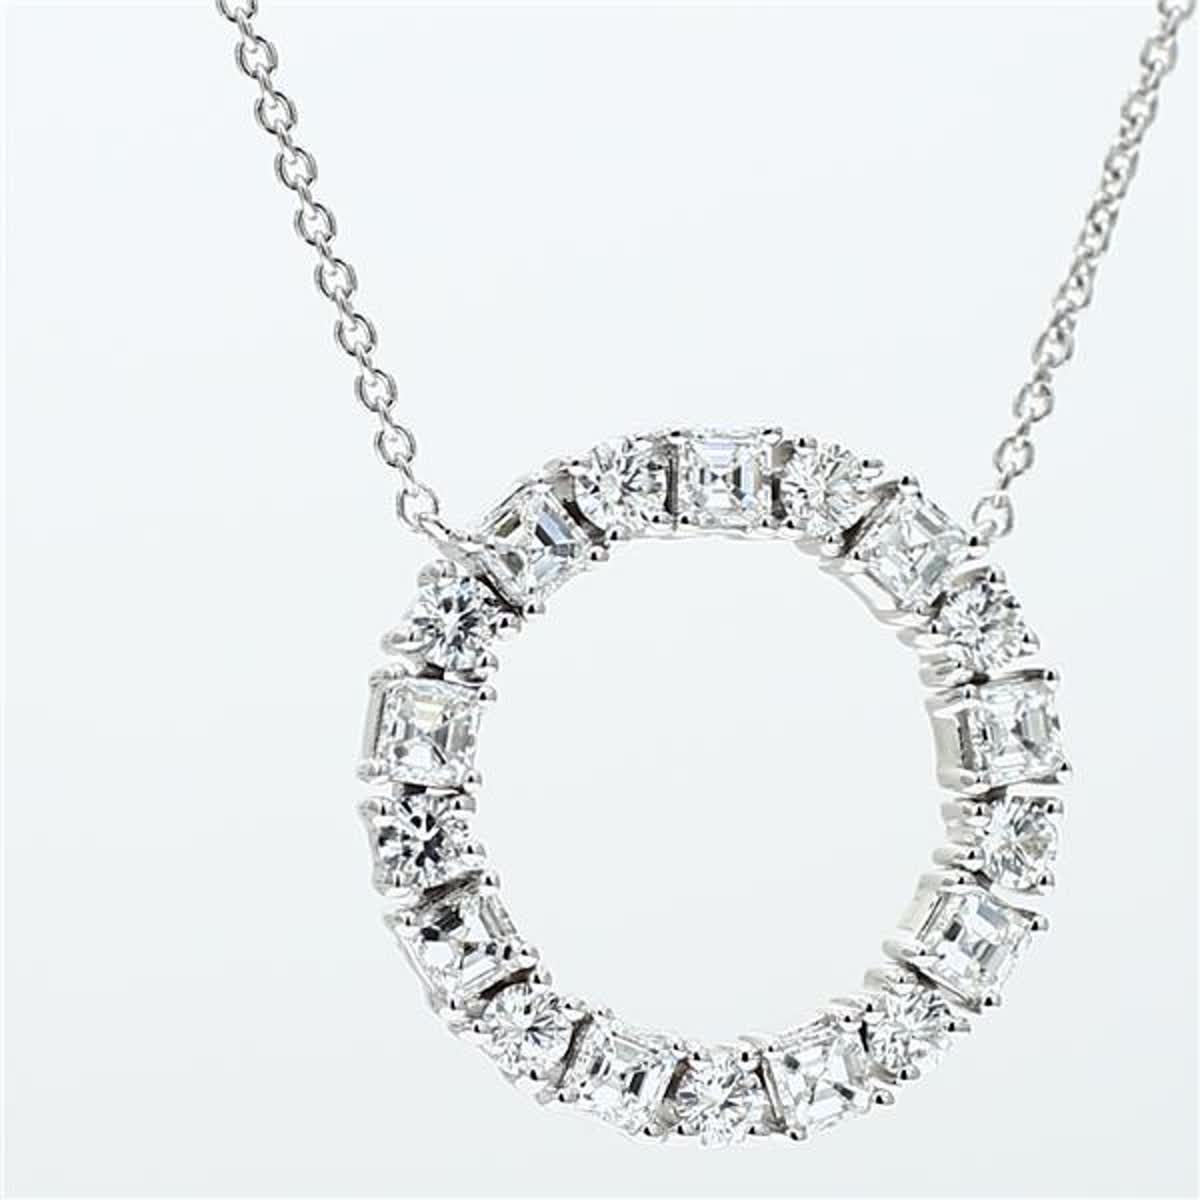 Natural White Radiant and Round Diamonds 1.35 Carat TW White Gold Necklace